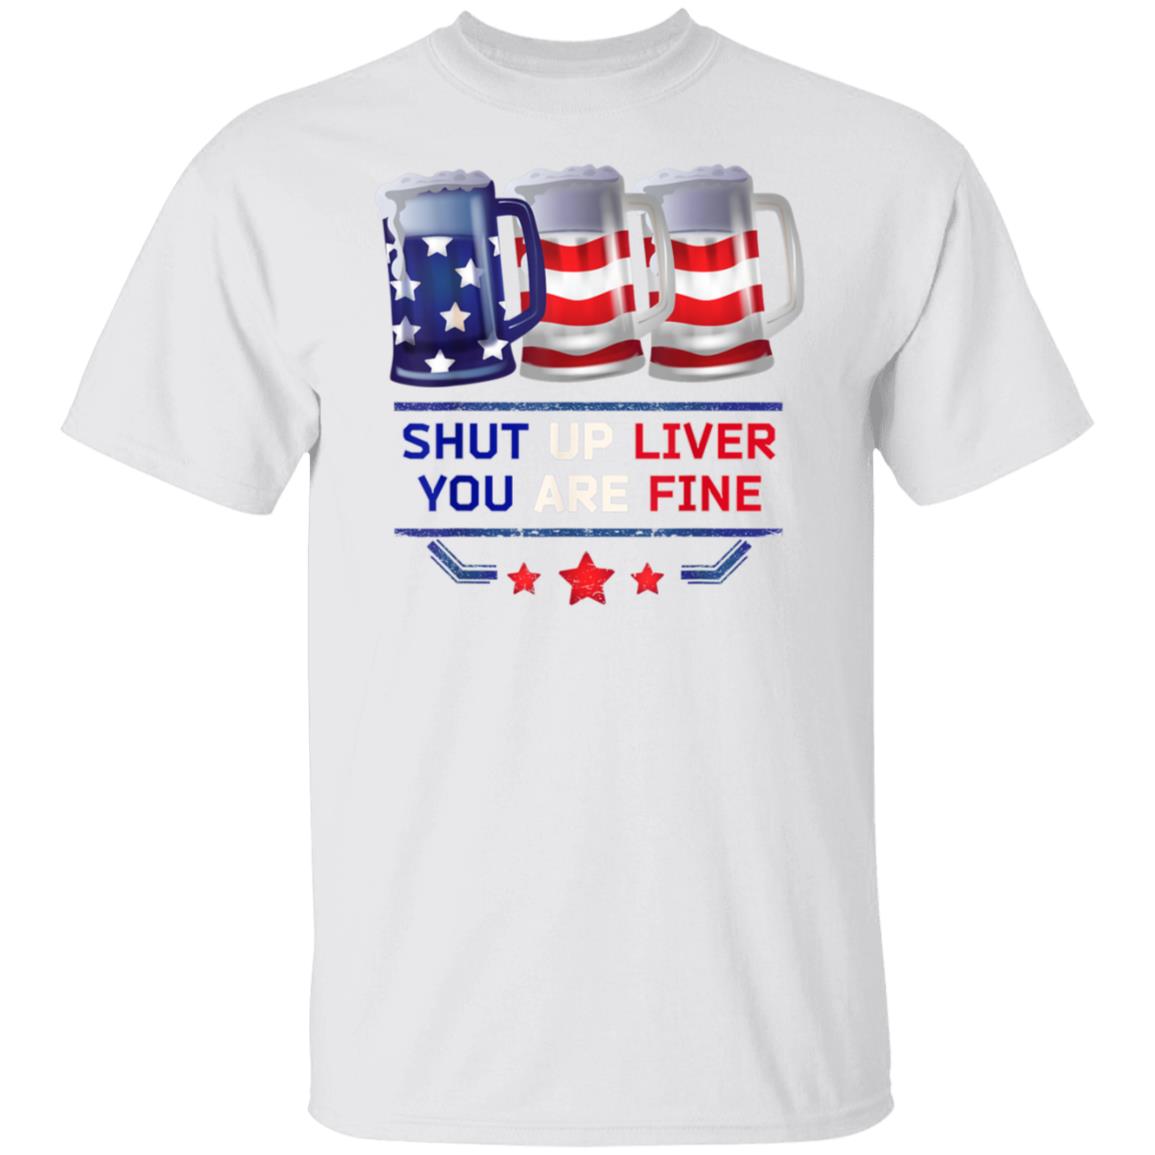 Funny Beer Mugs Outfit USA Flag 4th of July Clothes Men Gift White T-Shirt